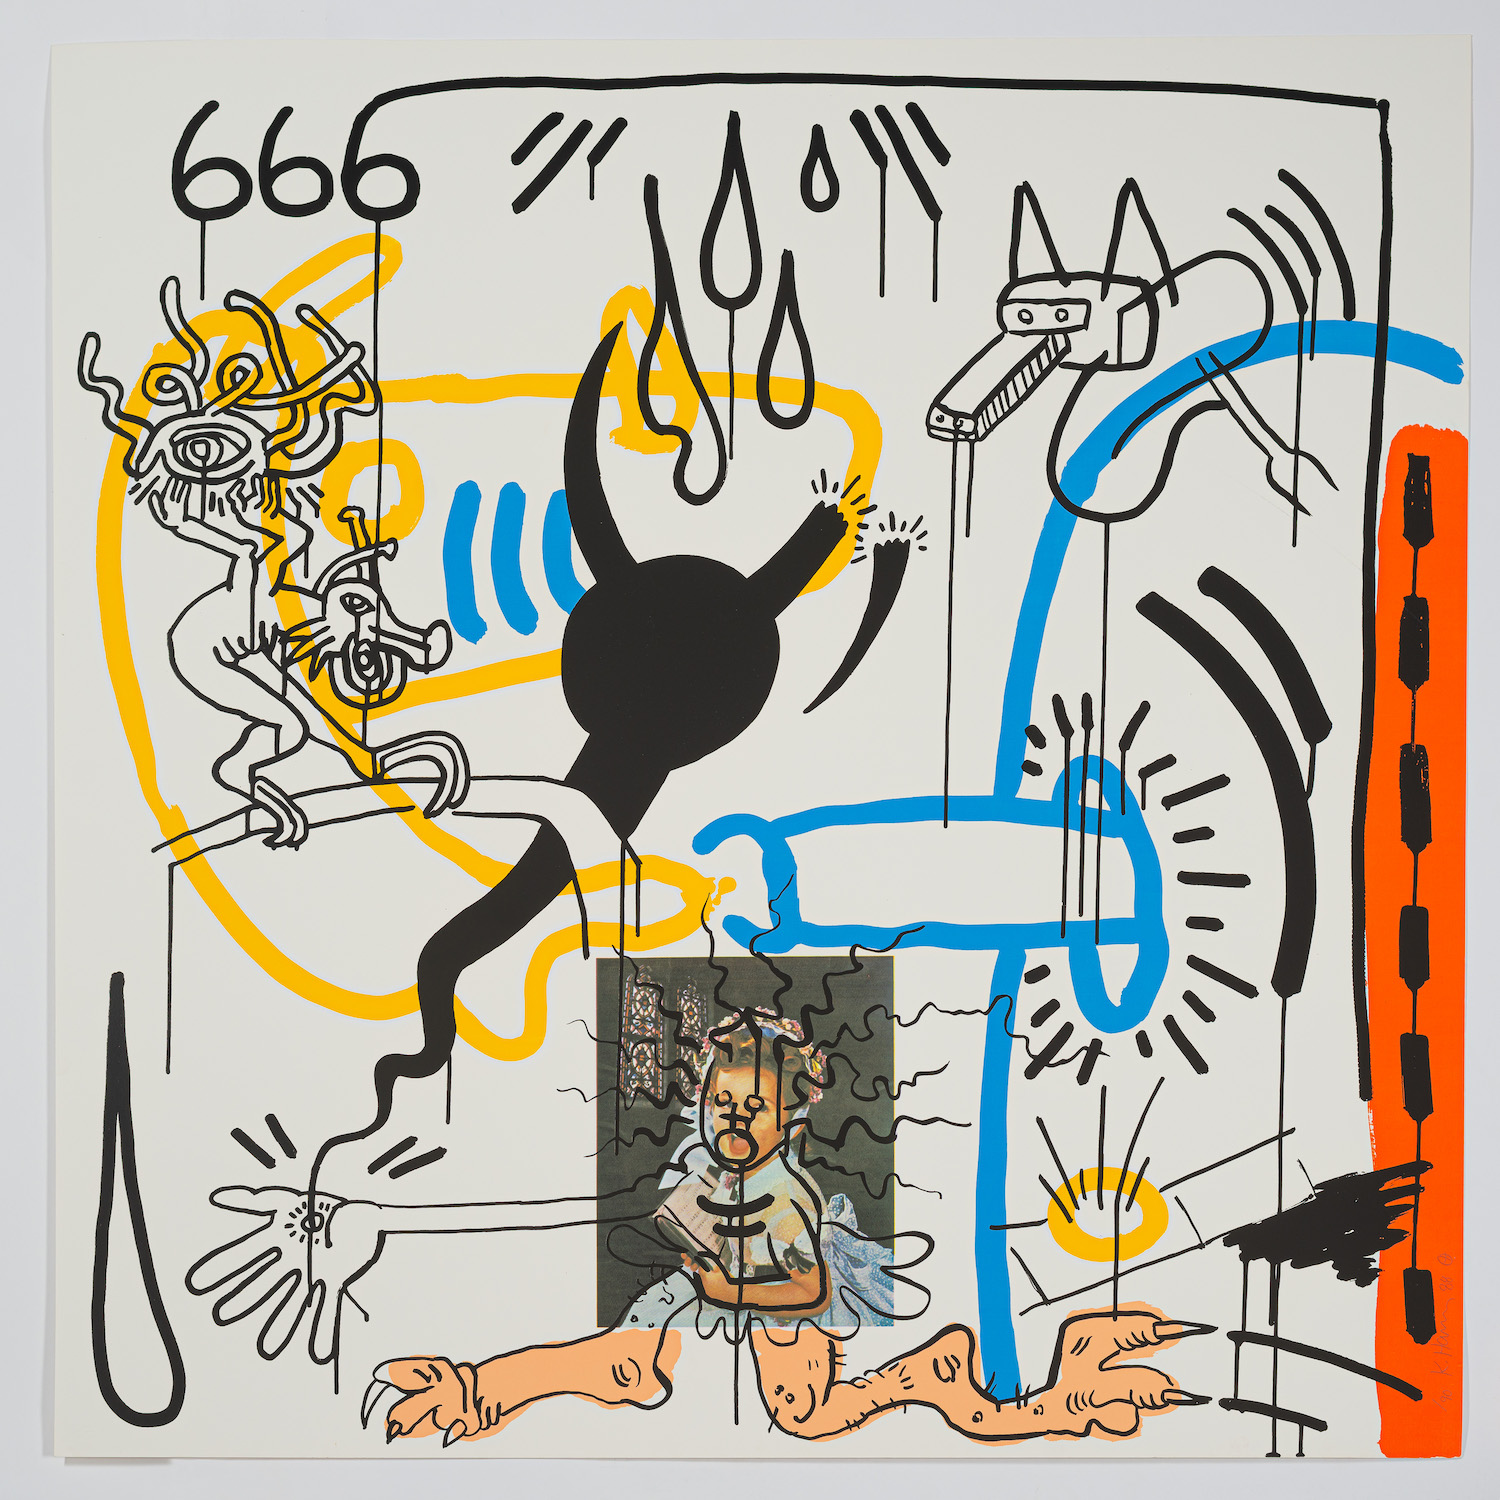 The Apocalypse 8 print by Keith Haring out of frame.